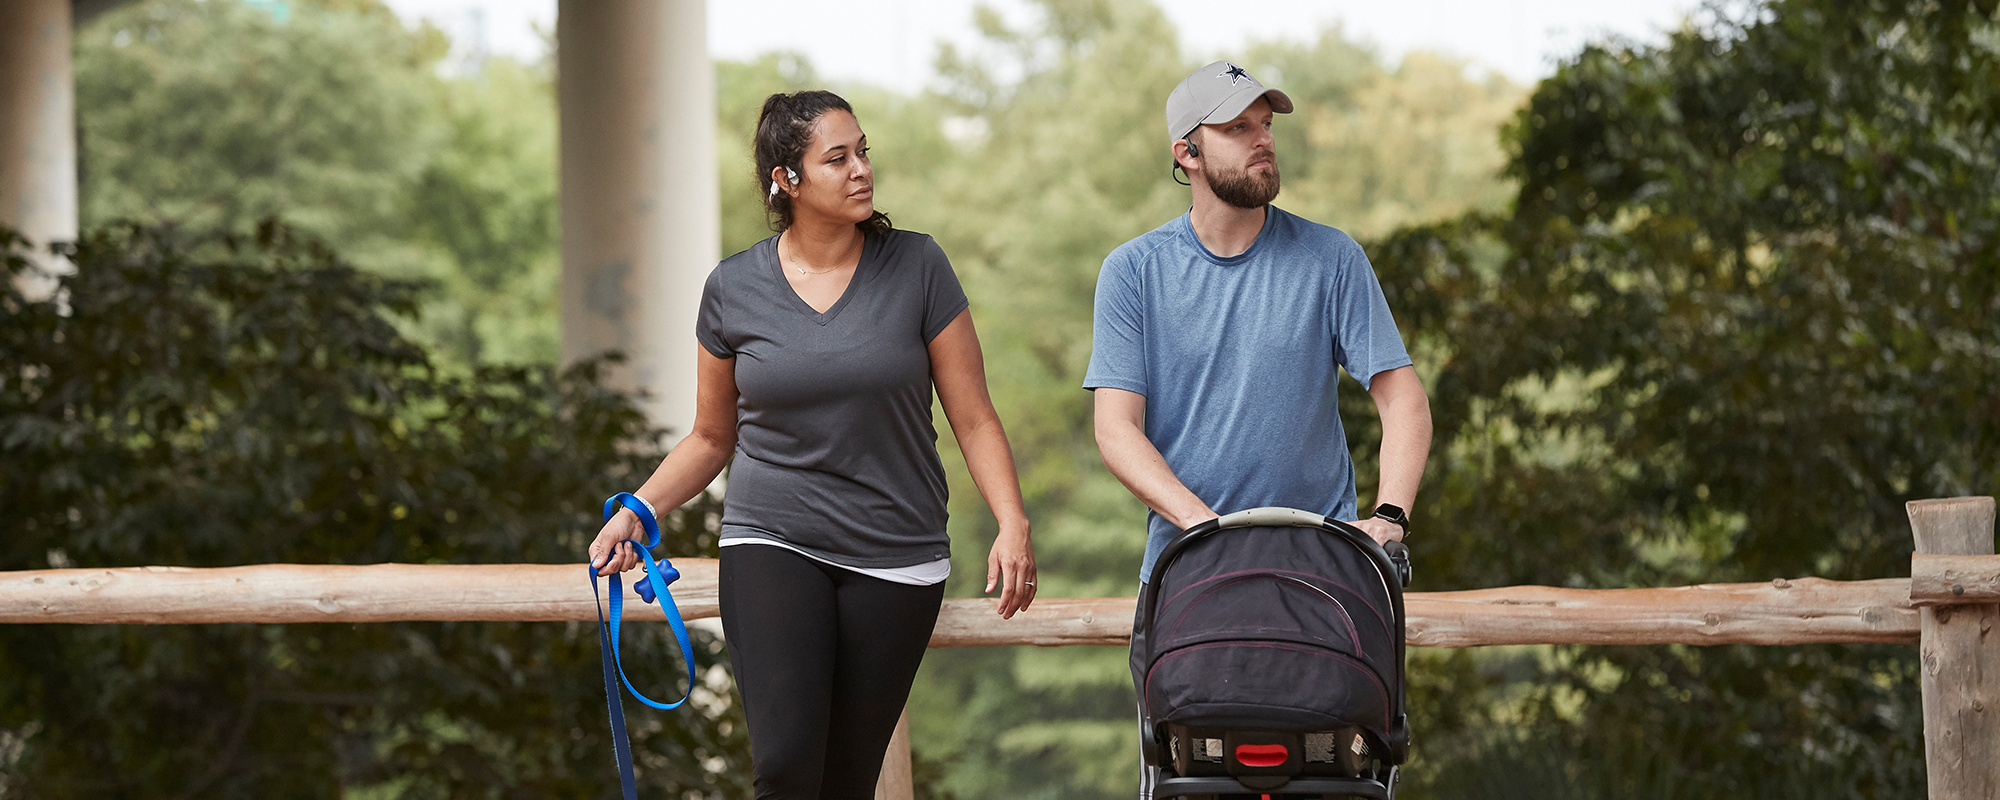 Man and woman walking with dog and child in stroller while wearing AfterShokz Aeropex headphones